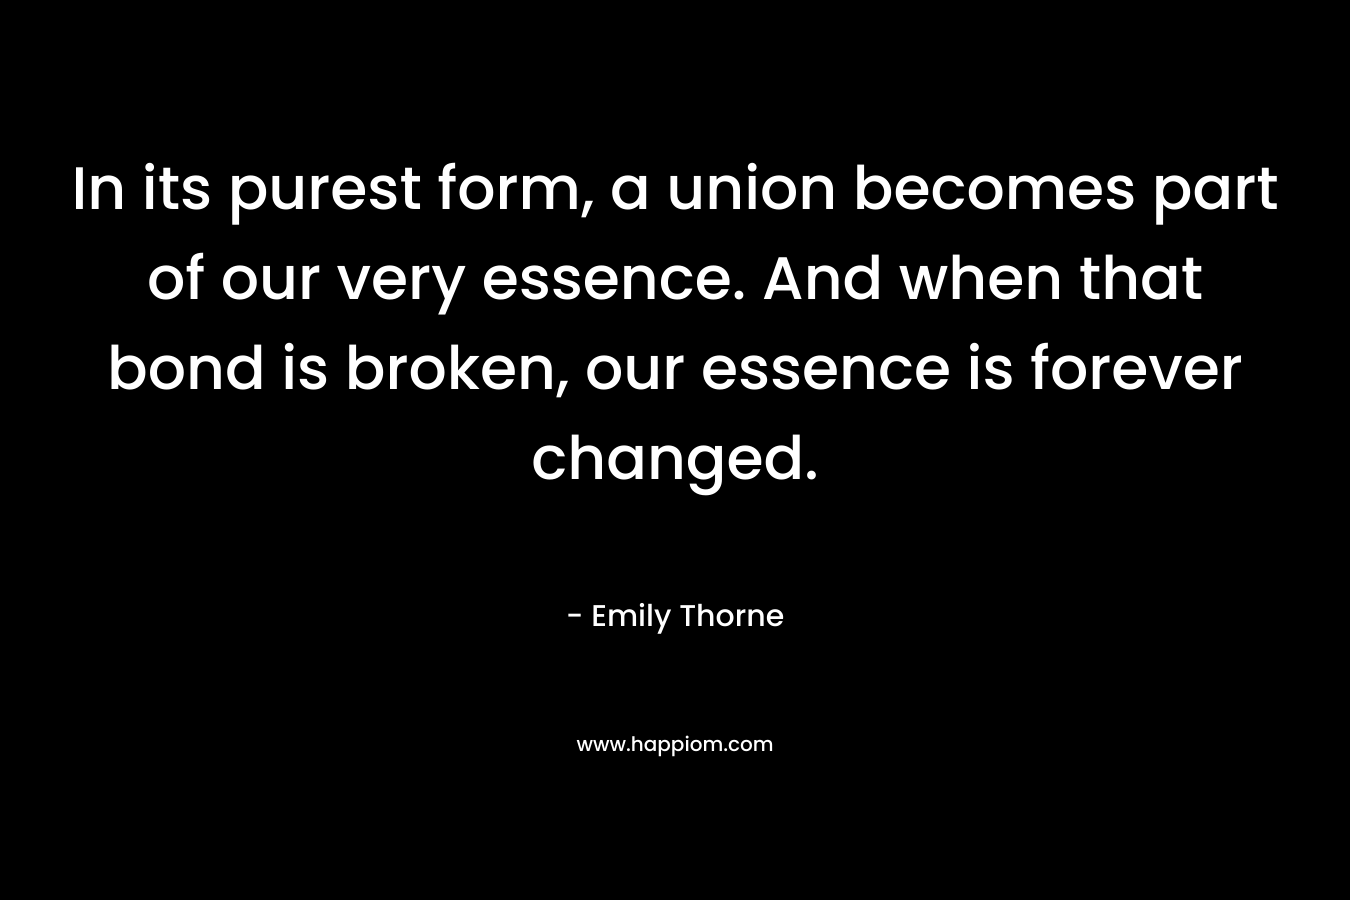 In its purest form, a union becomes part of our very essence. And when that bond is broken, our essence is forever changed. – Emily Thorne